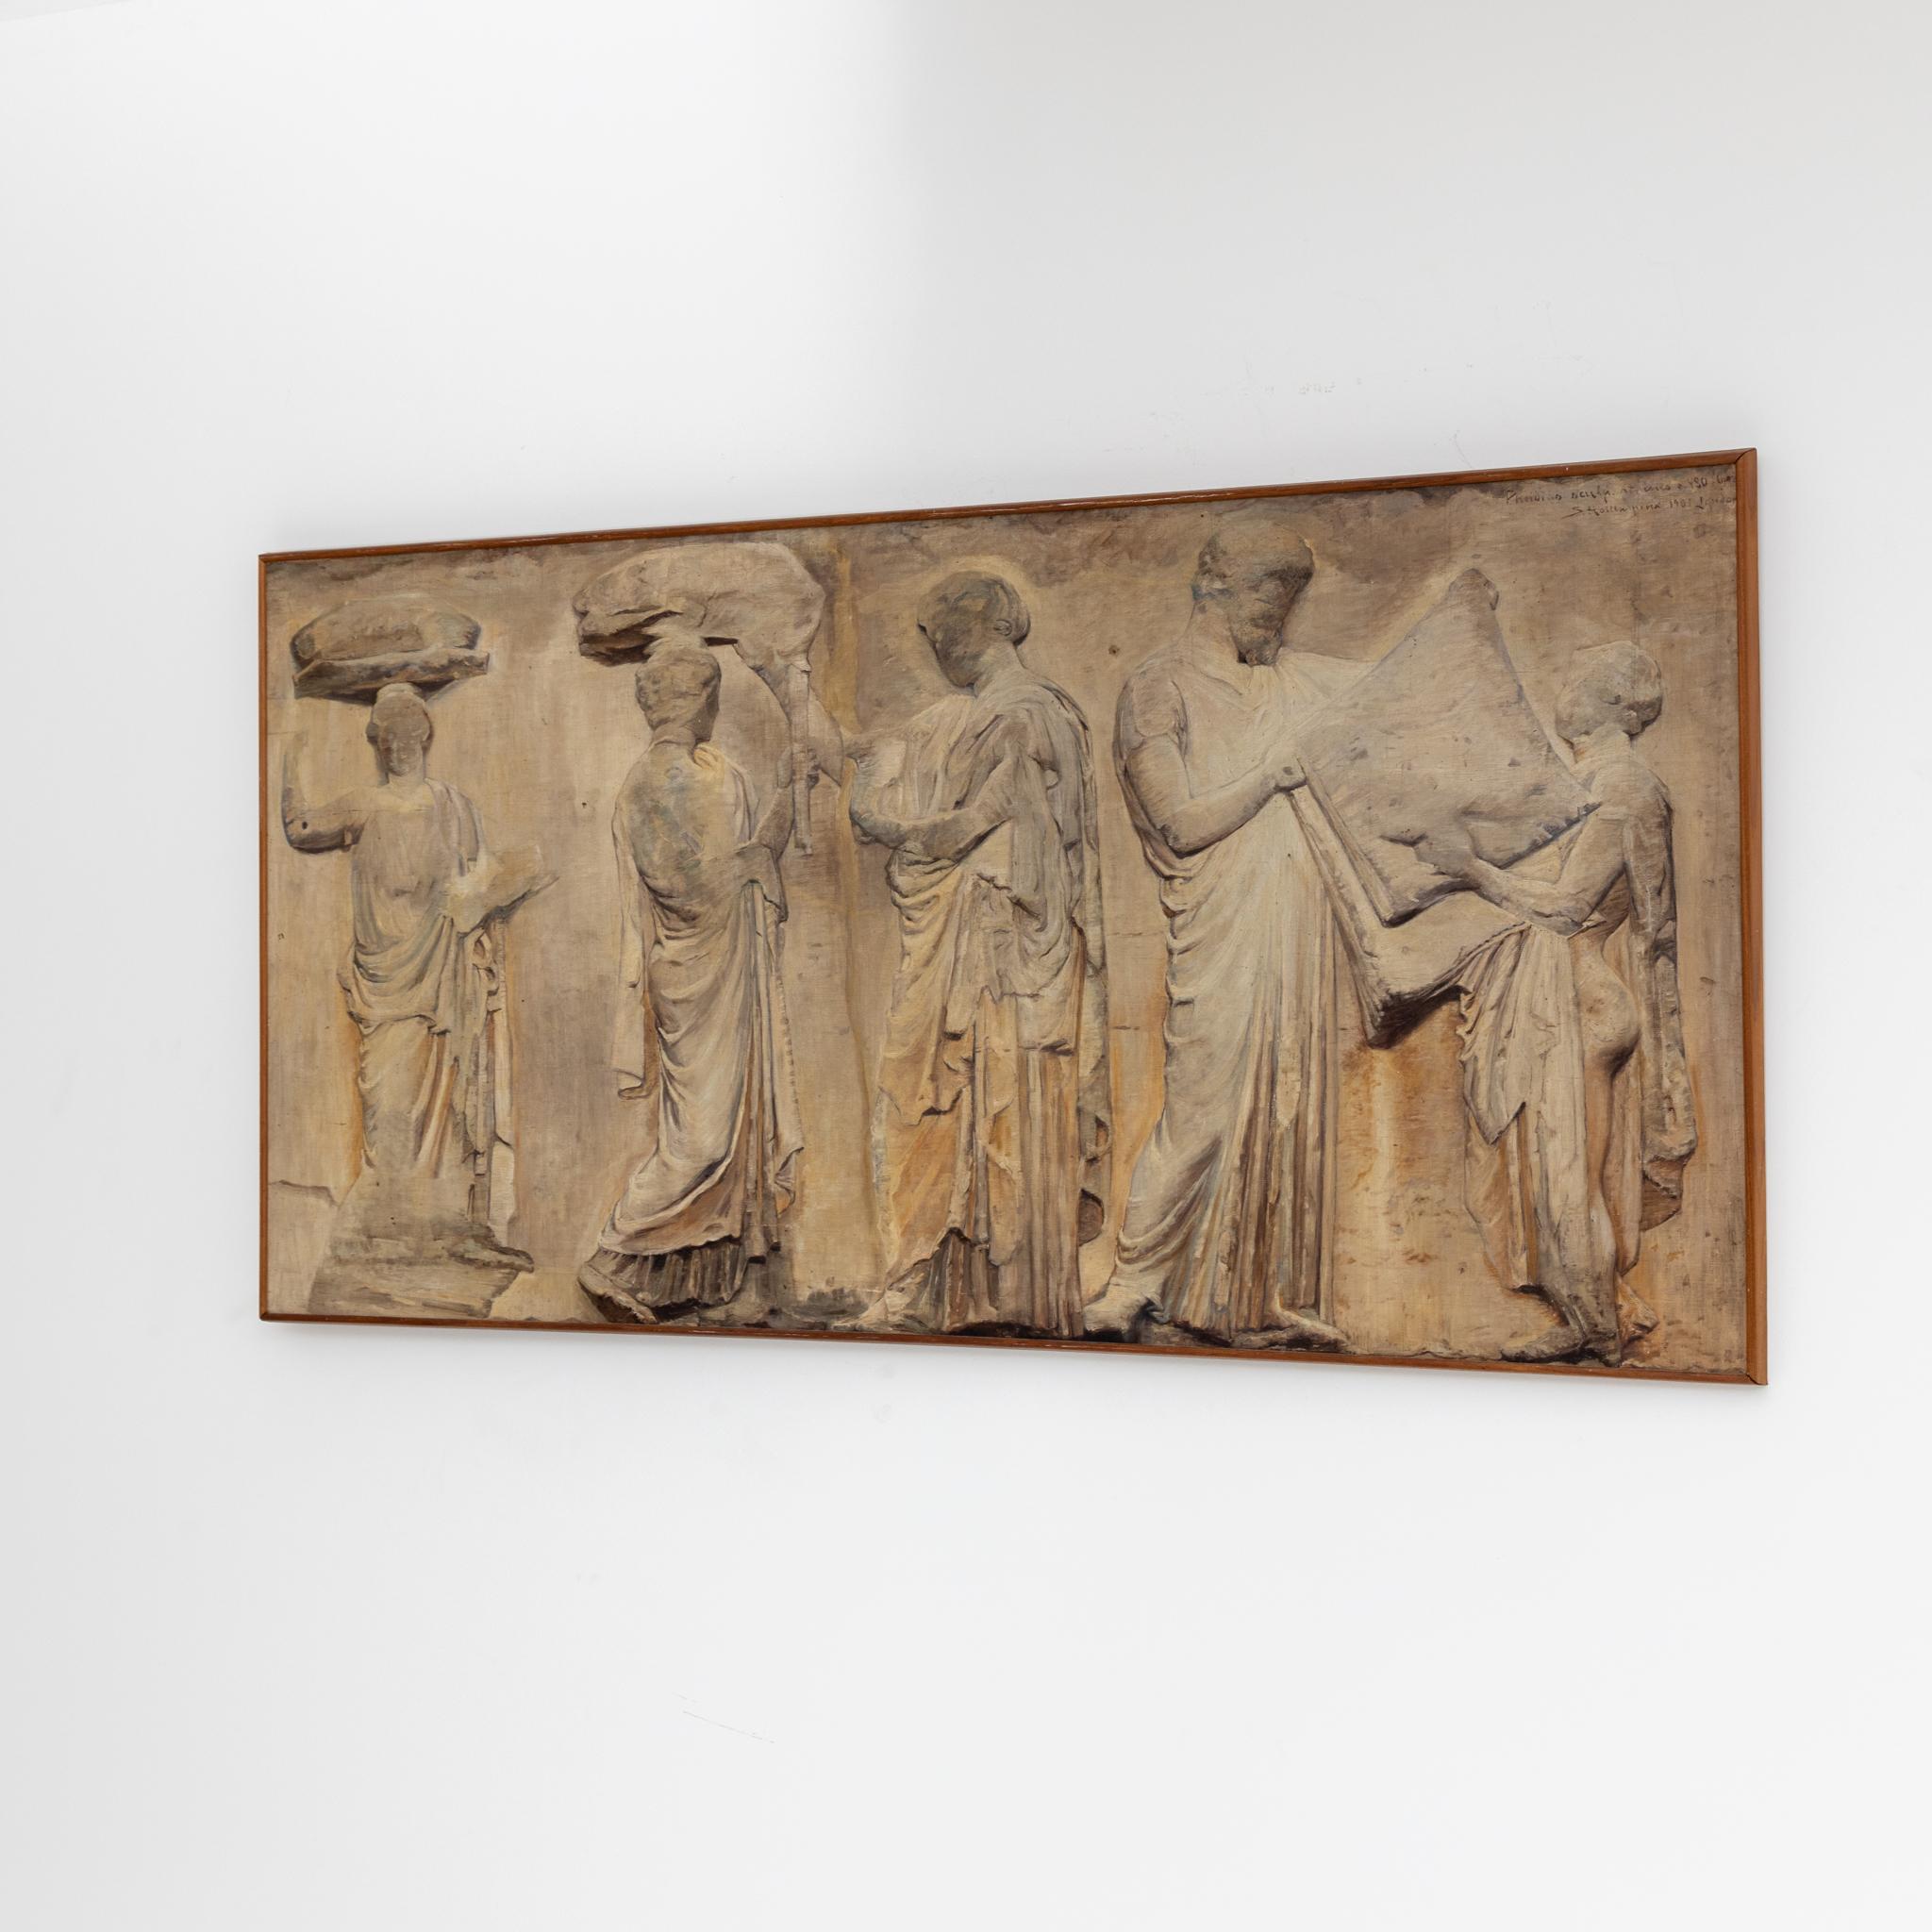 Painting based on the Peplos scene (Block V, eastern Parthenon frieze, ca. 447-433 BC) by the Danish painter Sophie Holten (1858 Skuldelev - 1930 Roskilde). Holten exhibited among others at the Paris Salon between 1886 and 1887. Upper right